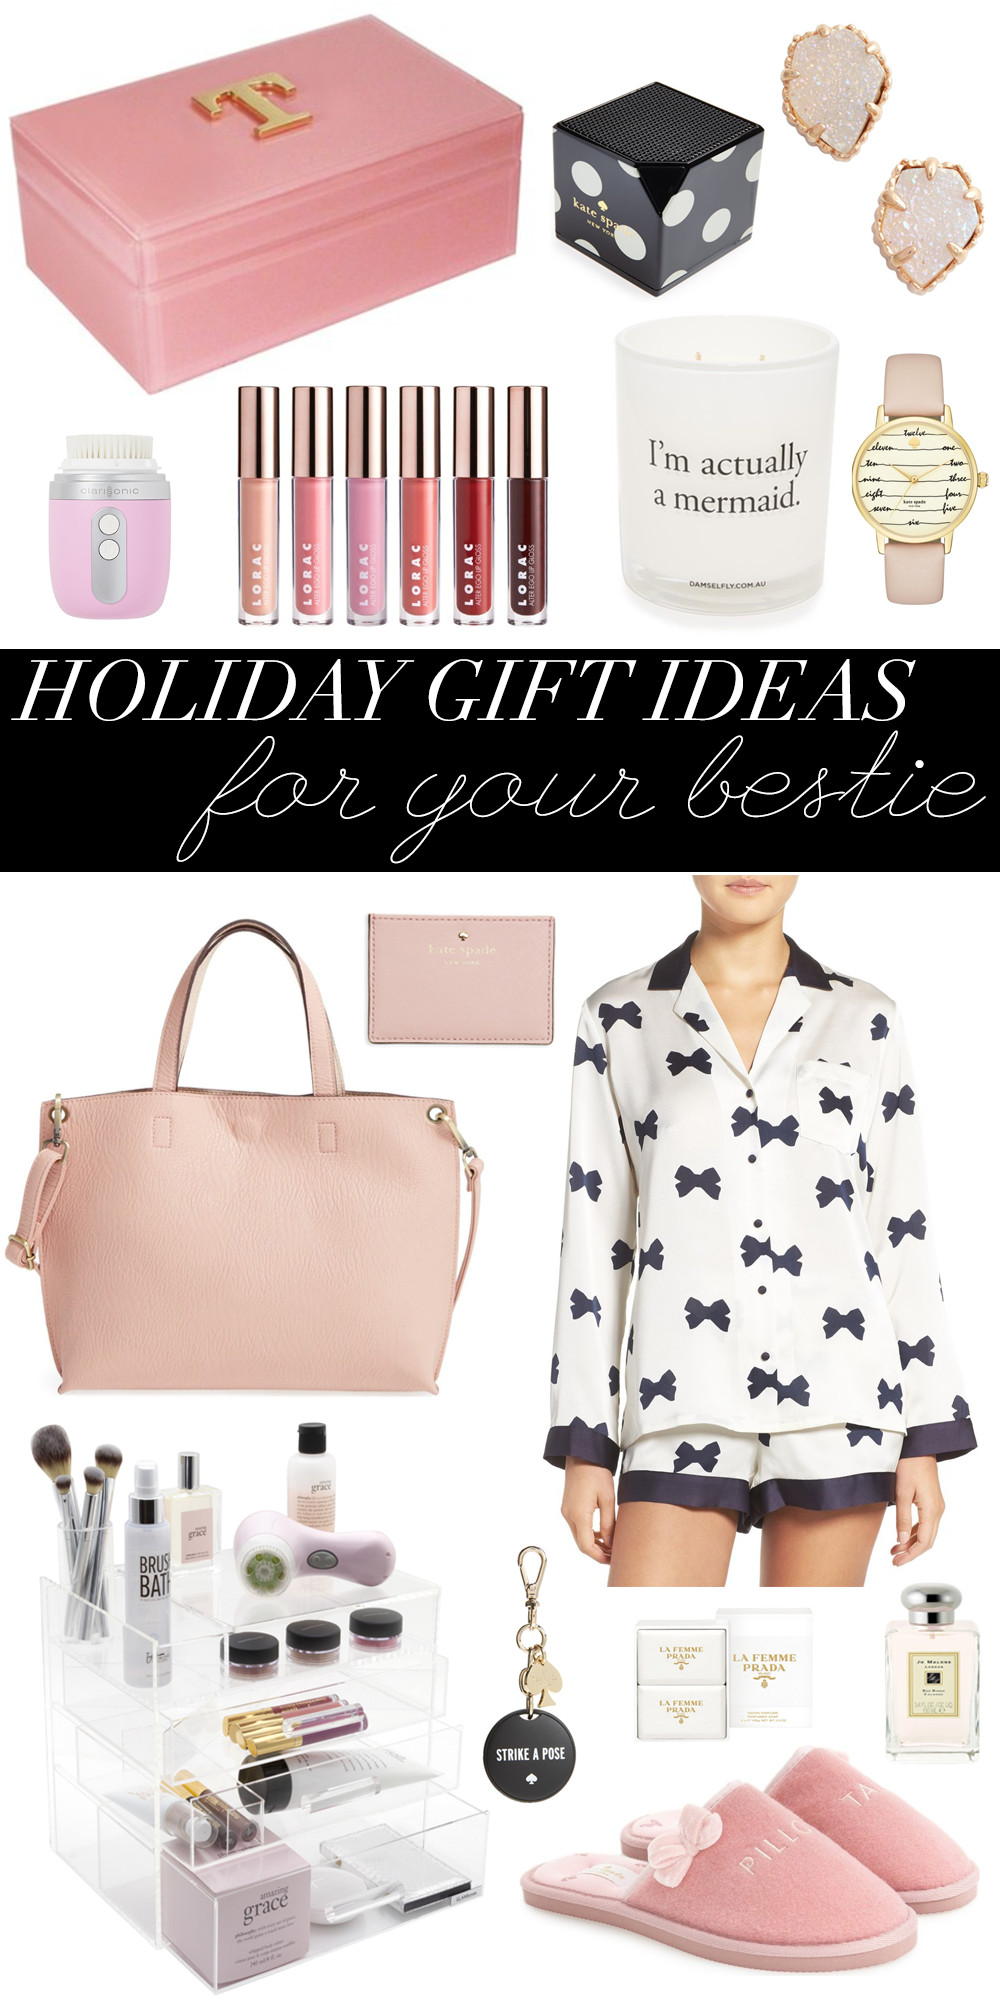 Cute Gift Ideas For Your Best Friend
 Holiday Gift Ideas For Your Best Friend Money Can Buy